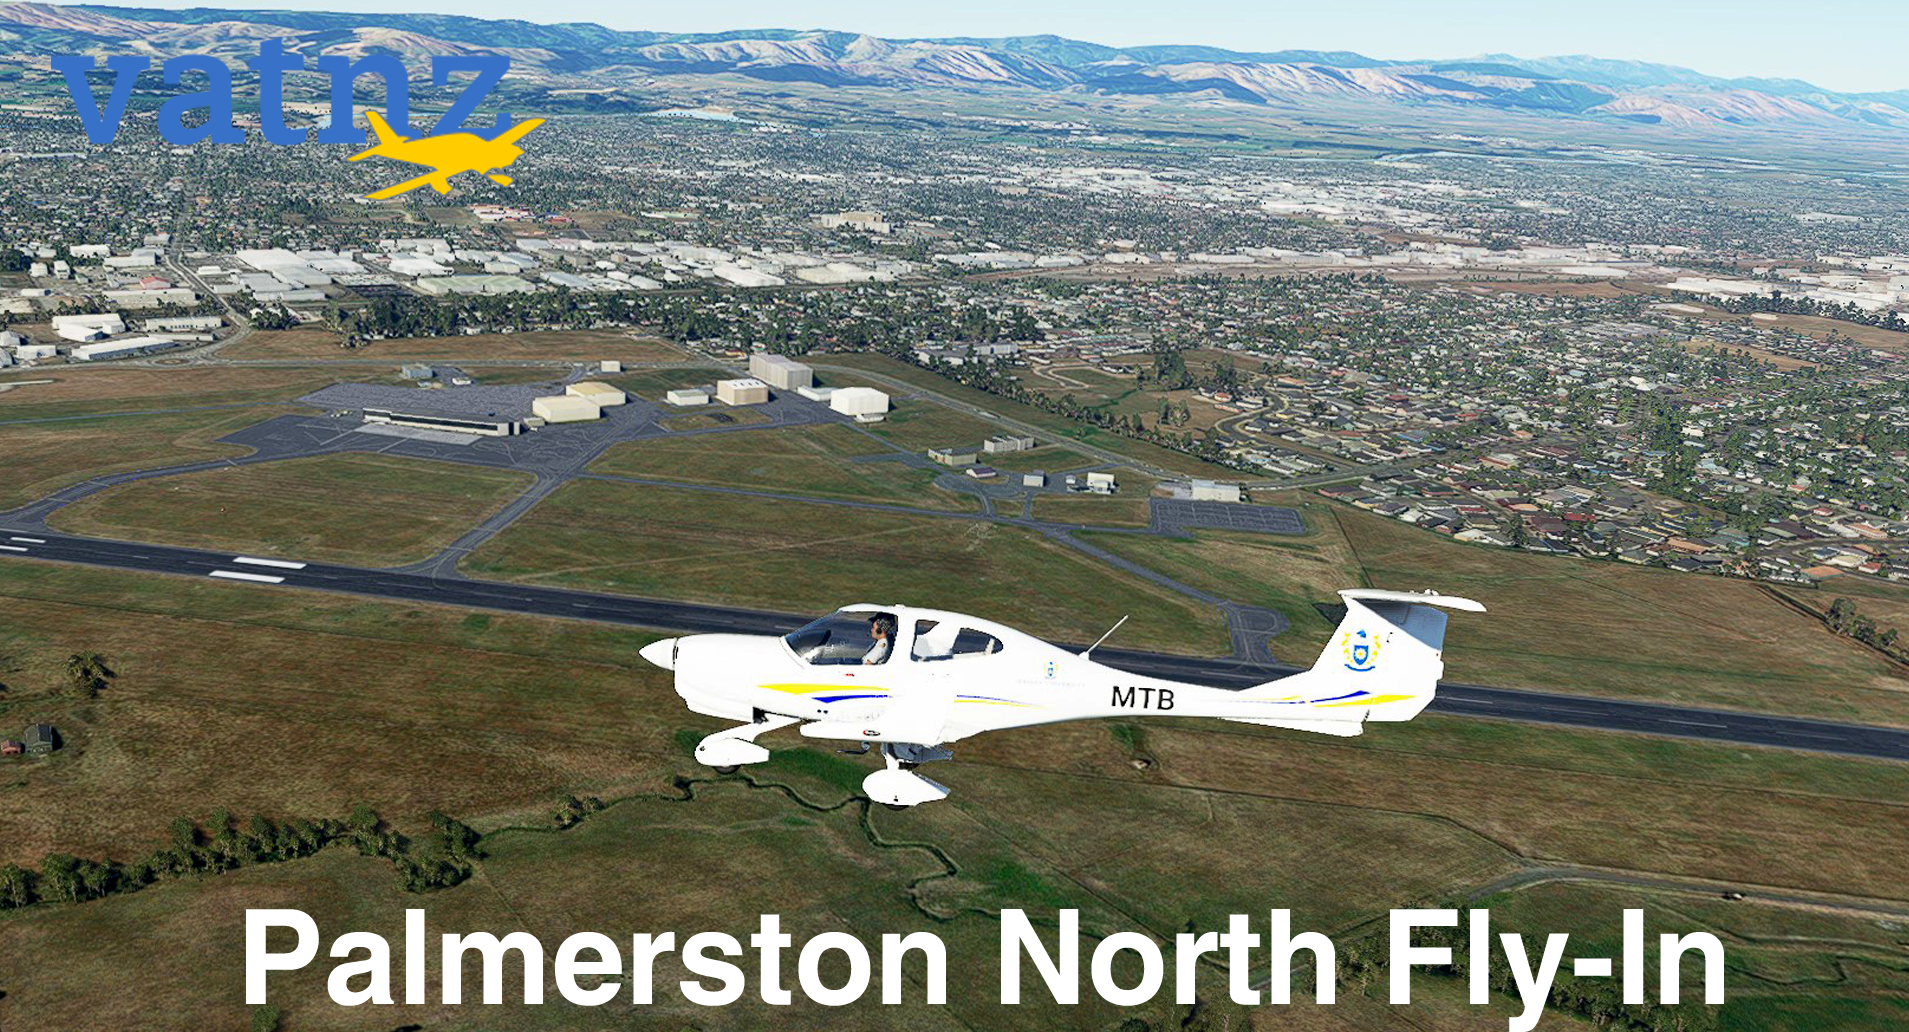 Palmerston North Fly-in